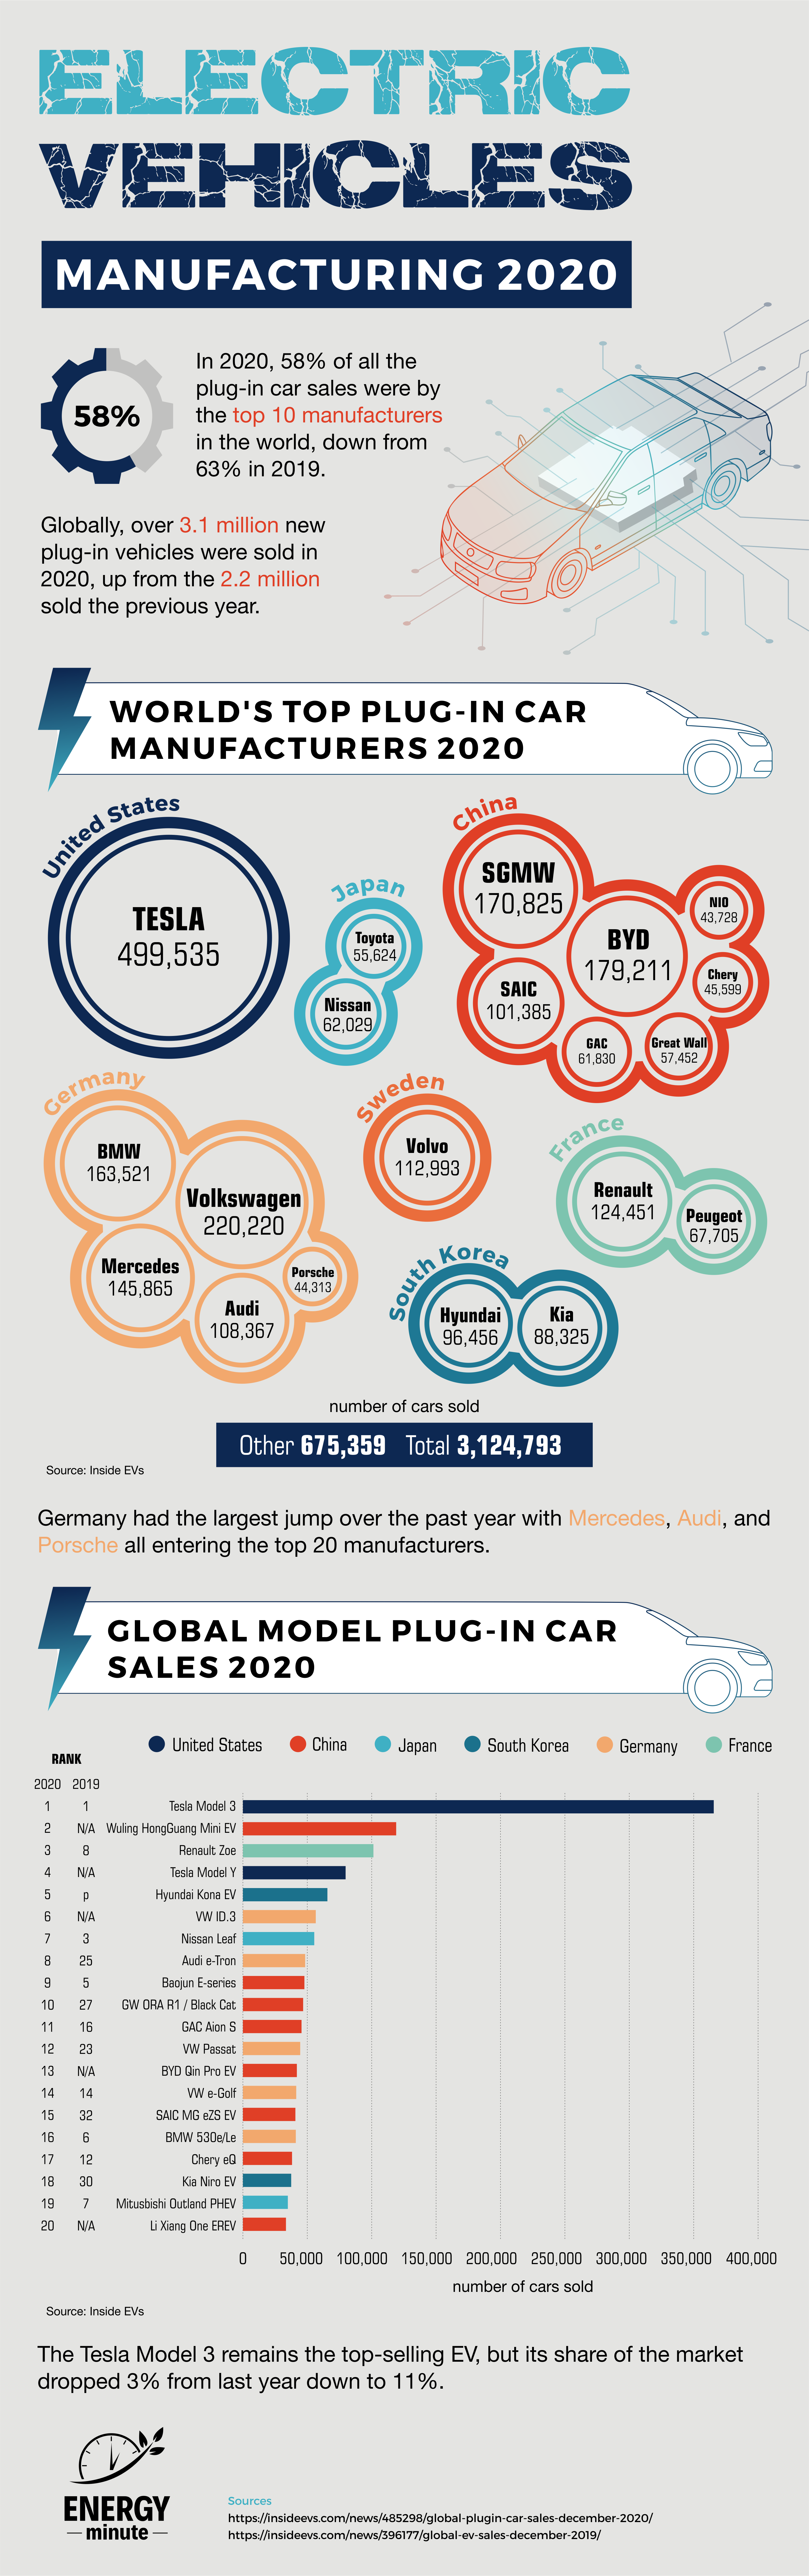 The Top Electric Vehicle Manufacturers in 2020